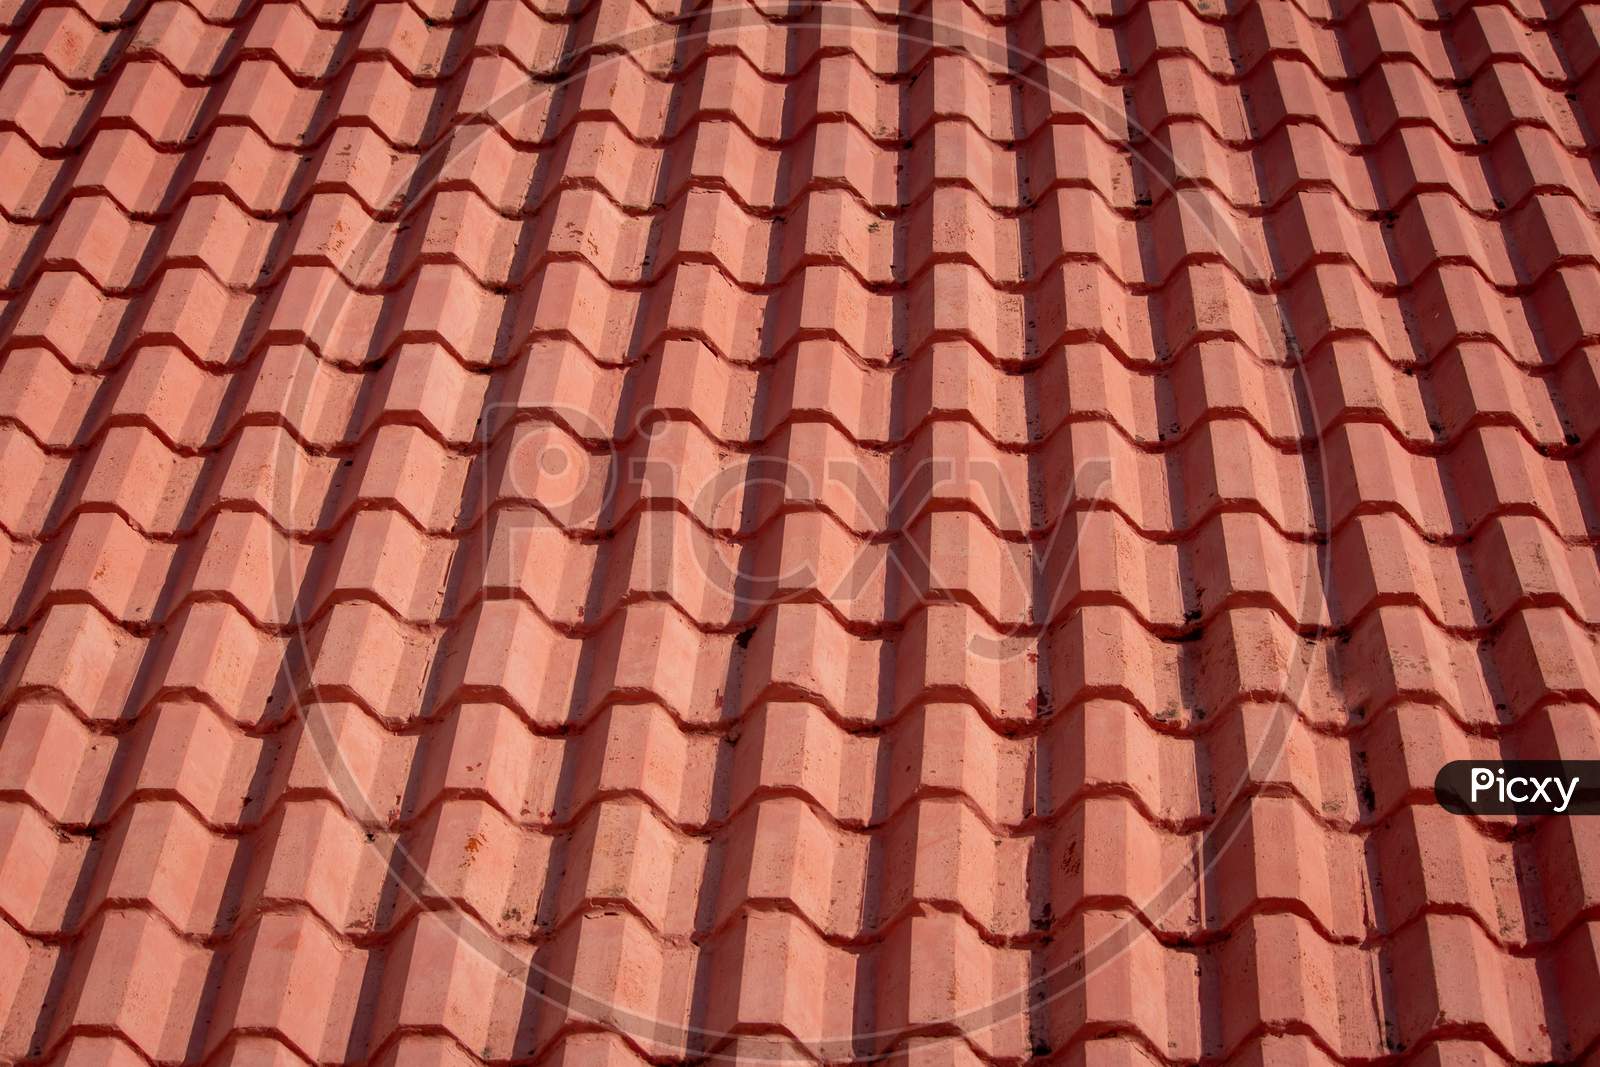 Roof Tiles On Guest House In Yercaud, Tamil Nadu. Styling Of Roof With Tiles.